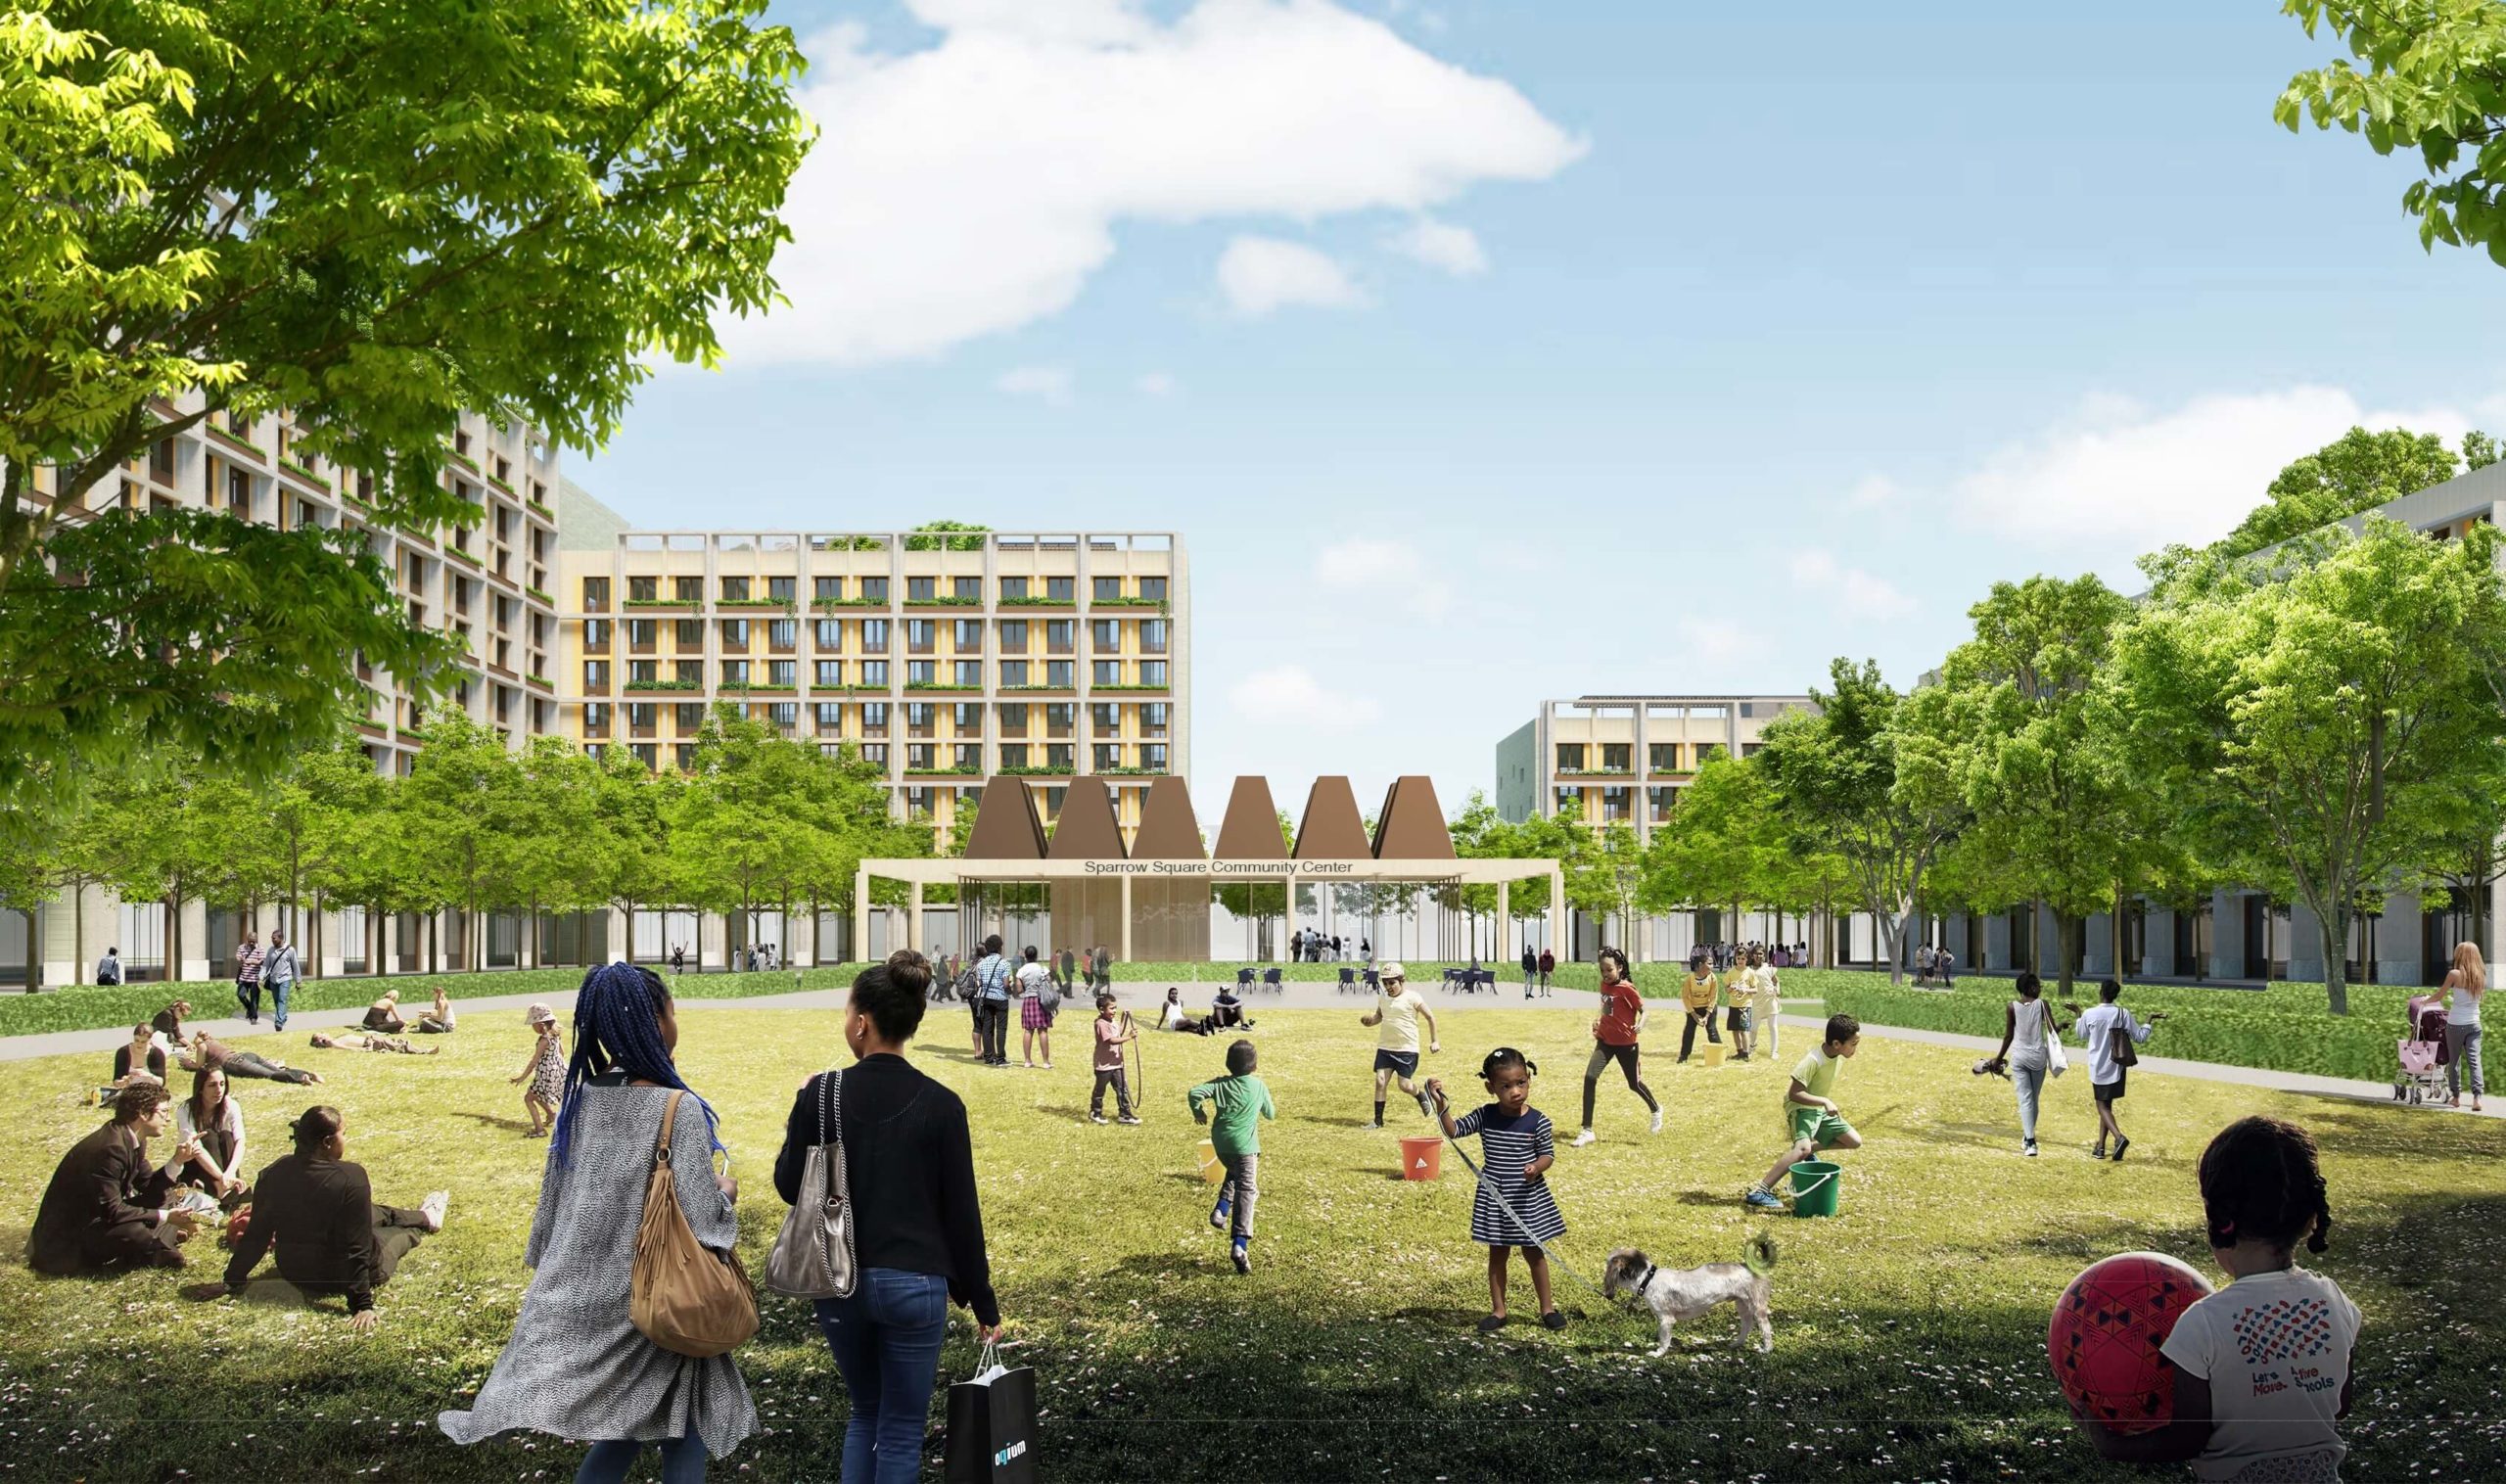 Rendering showing people enjoying the green area outside the building complex.